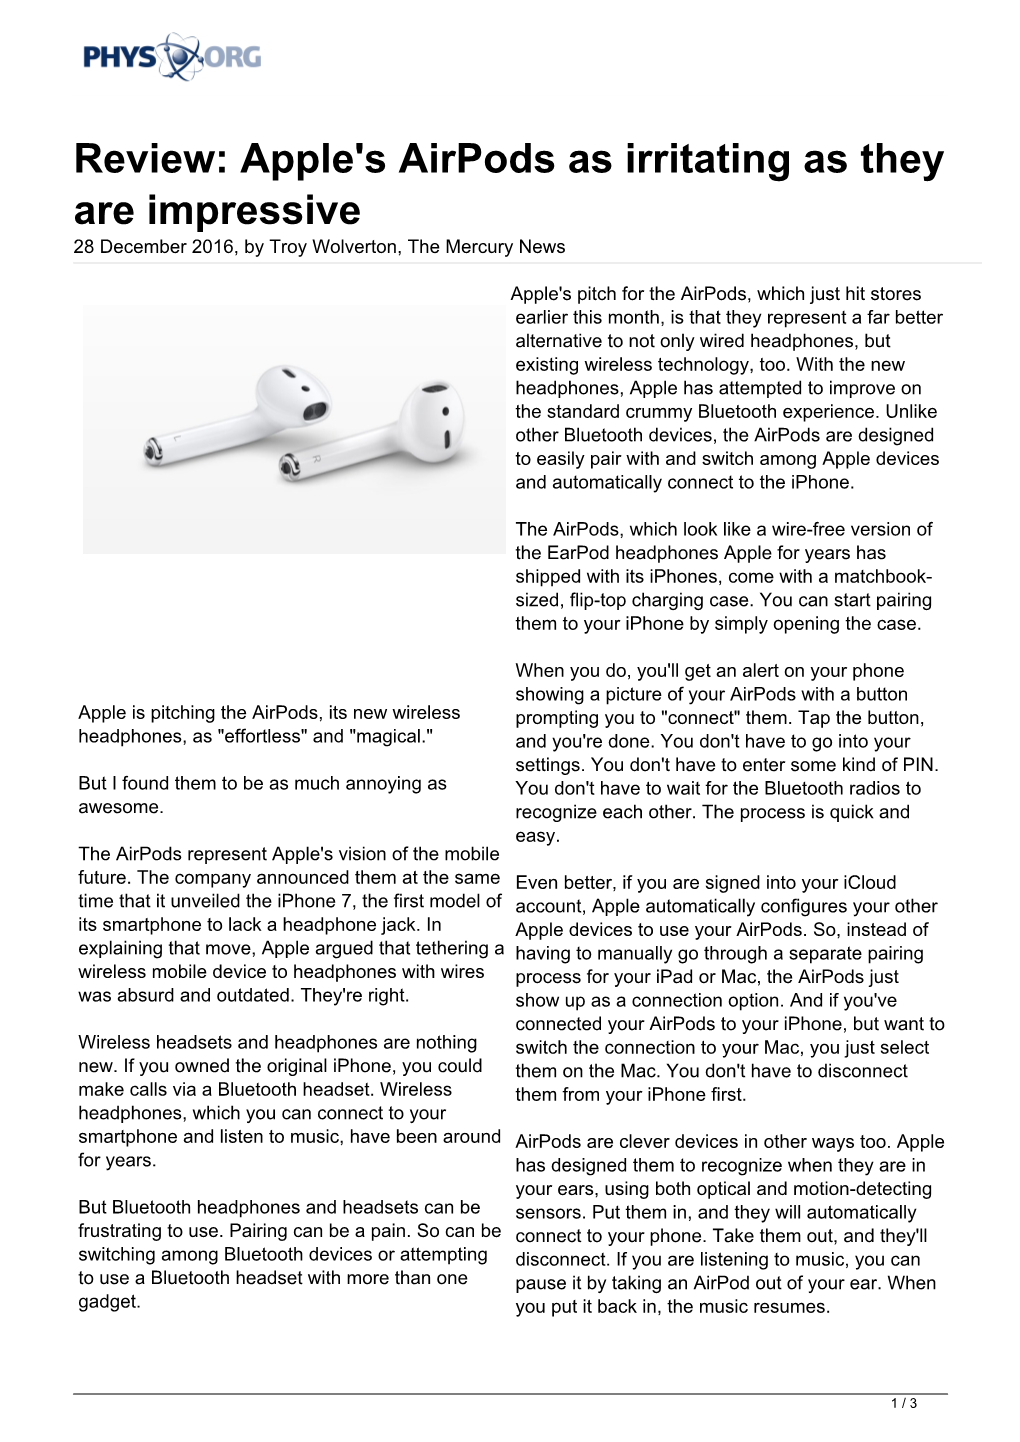 Review: Apple's Airpods As Irritating As They Are Impressive 28 December 2016, by Troy Wolverton, the Mercury News